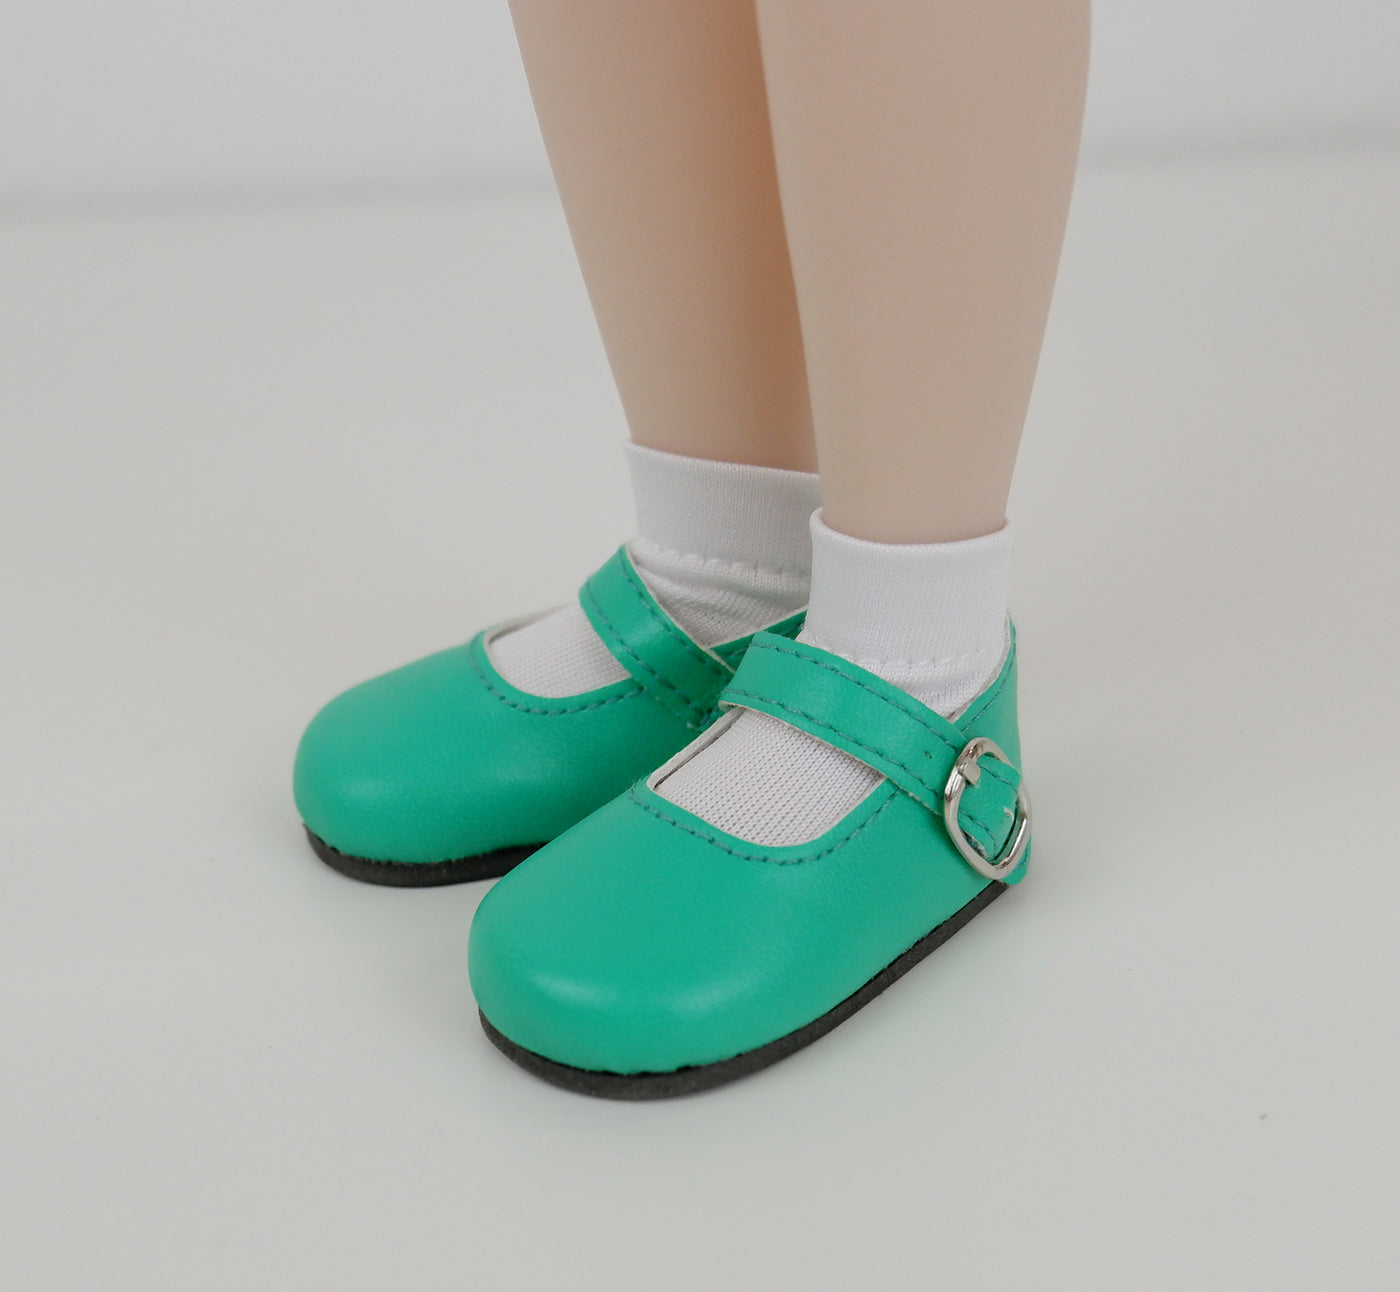 Simple Mary Jane Shoes - Jade